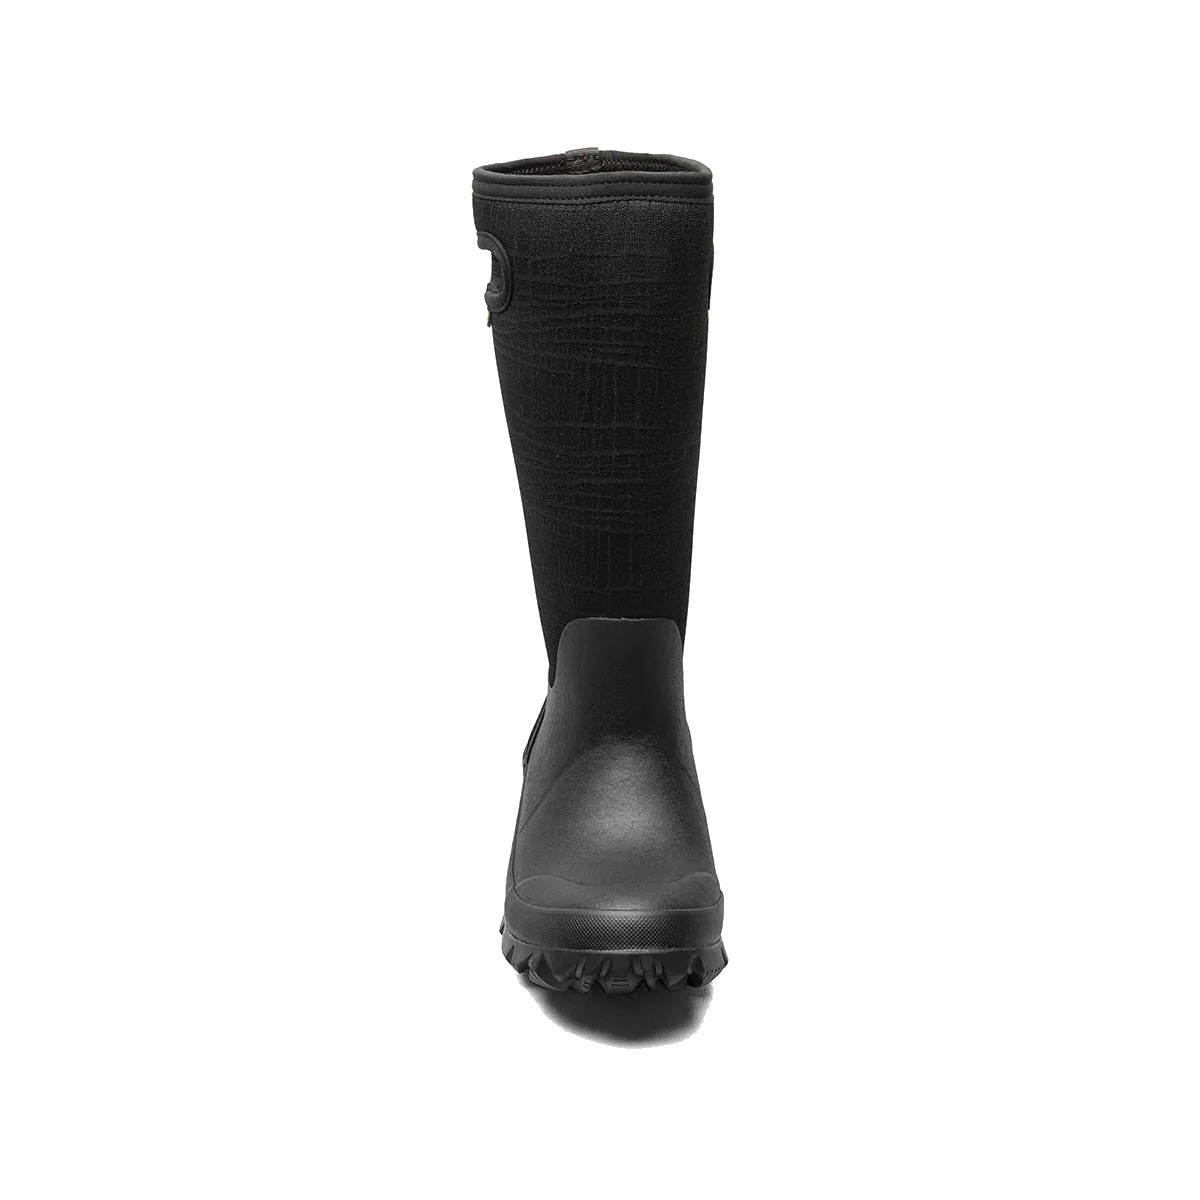 Sentence with product replaced:

&quot;BOGS WHITEOUT CRACKS BLACK - WOMENS winter boot with a textured upper and rugged sole, featuring waterproof insulation, displayed on a white background.